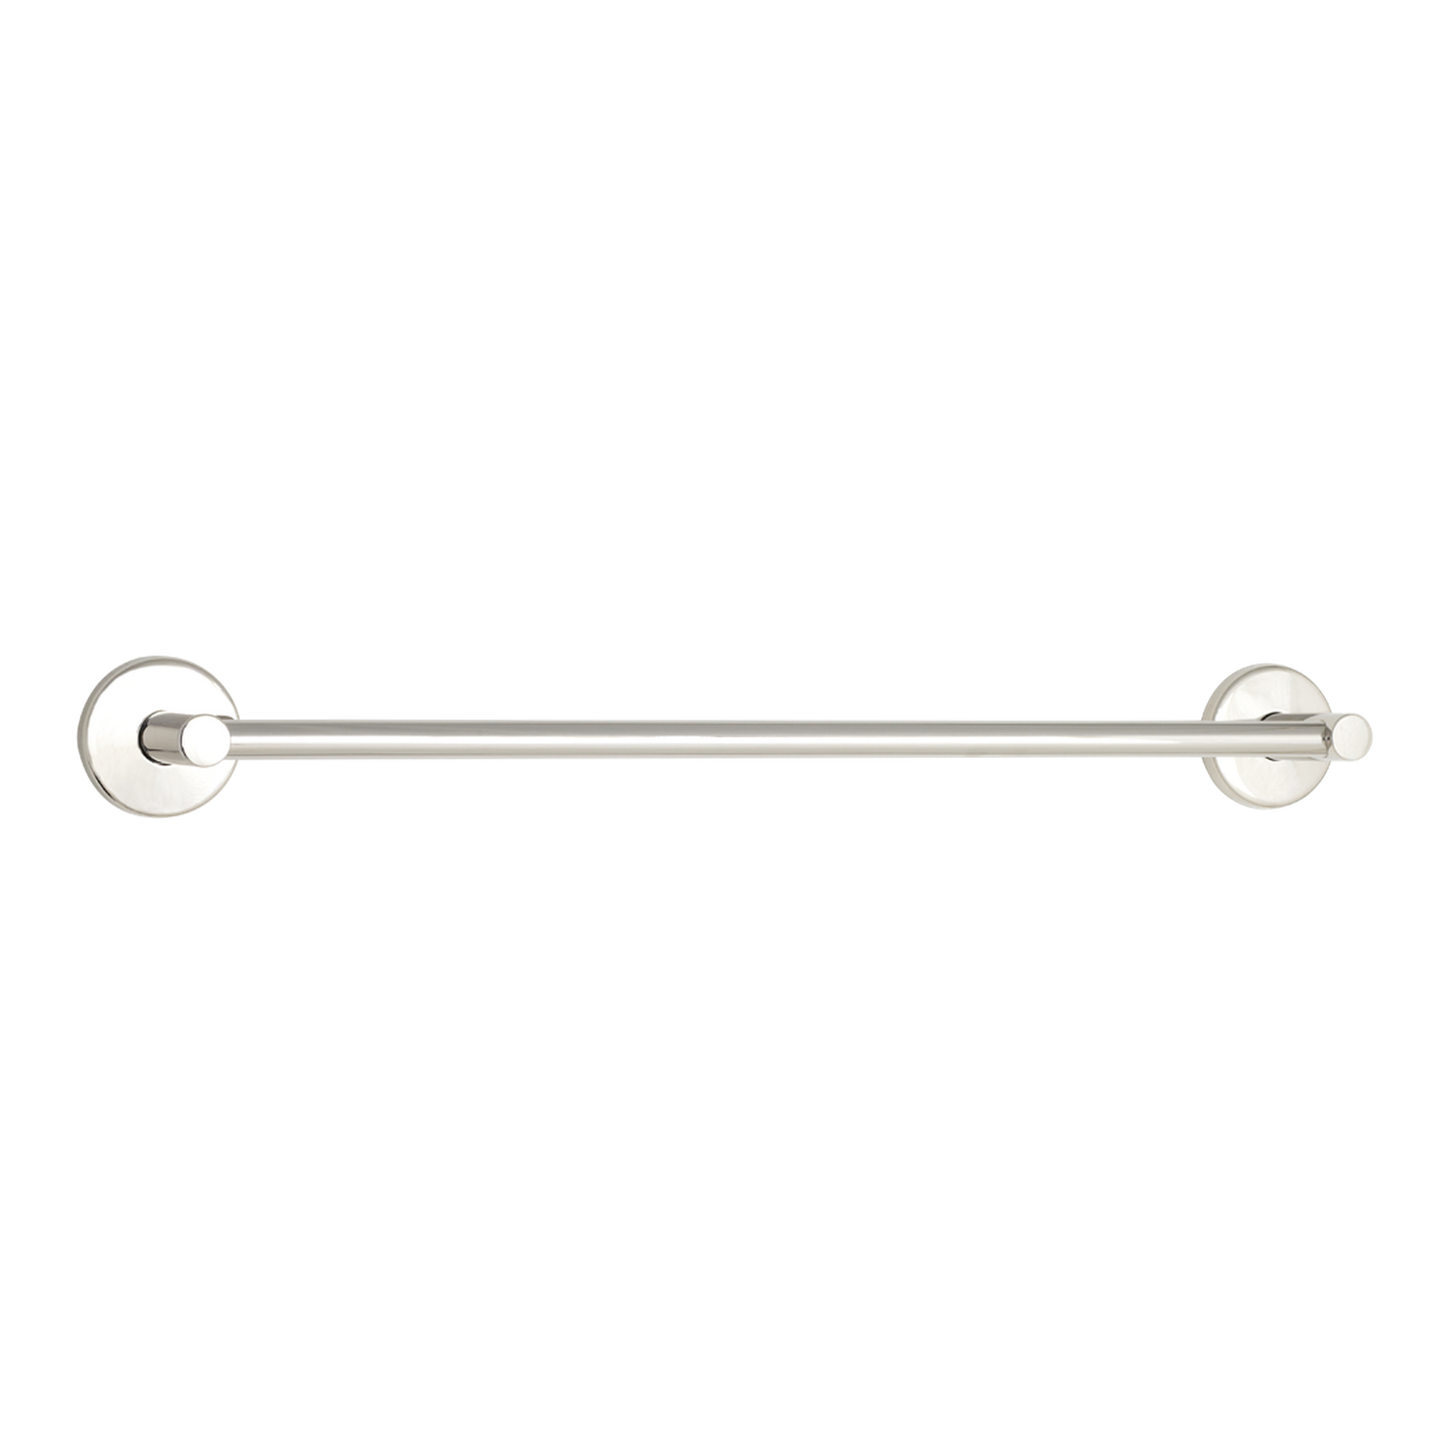 Seachrome Conorado Series 18" Satin Stainless Steel Concealed Mounting Flange Single Towel Bar